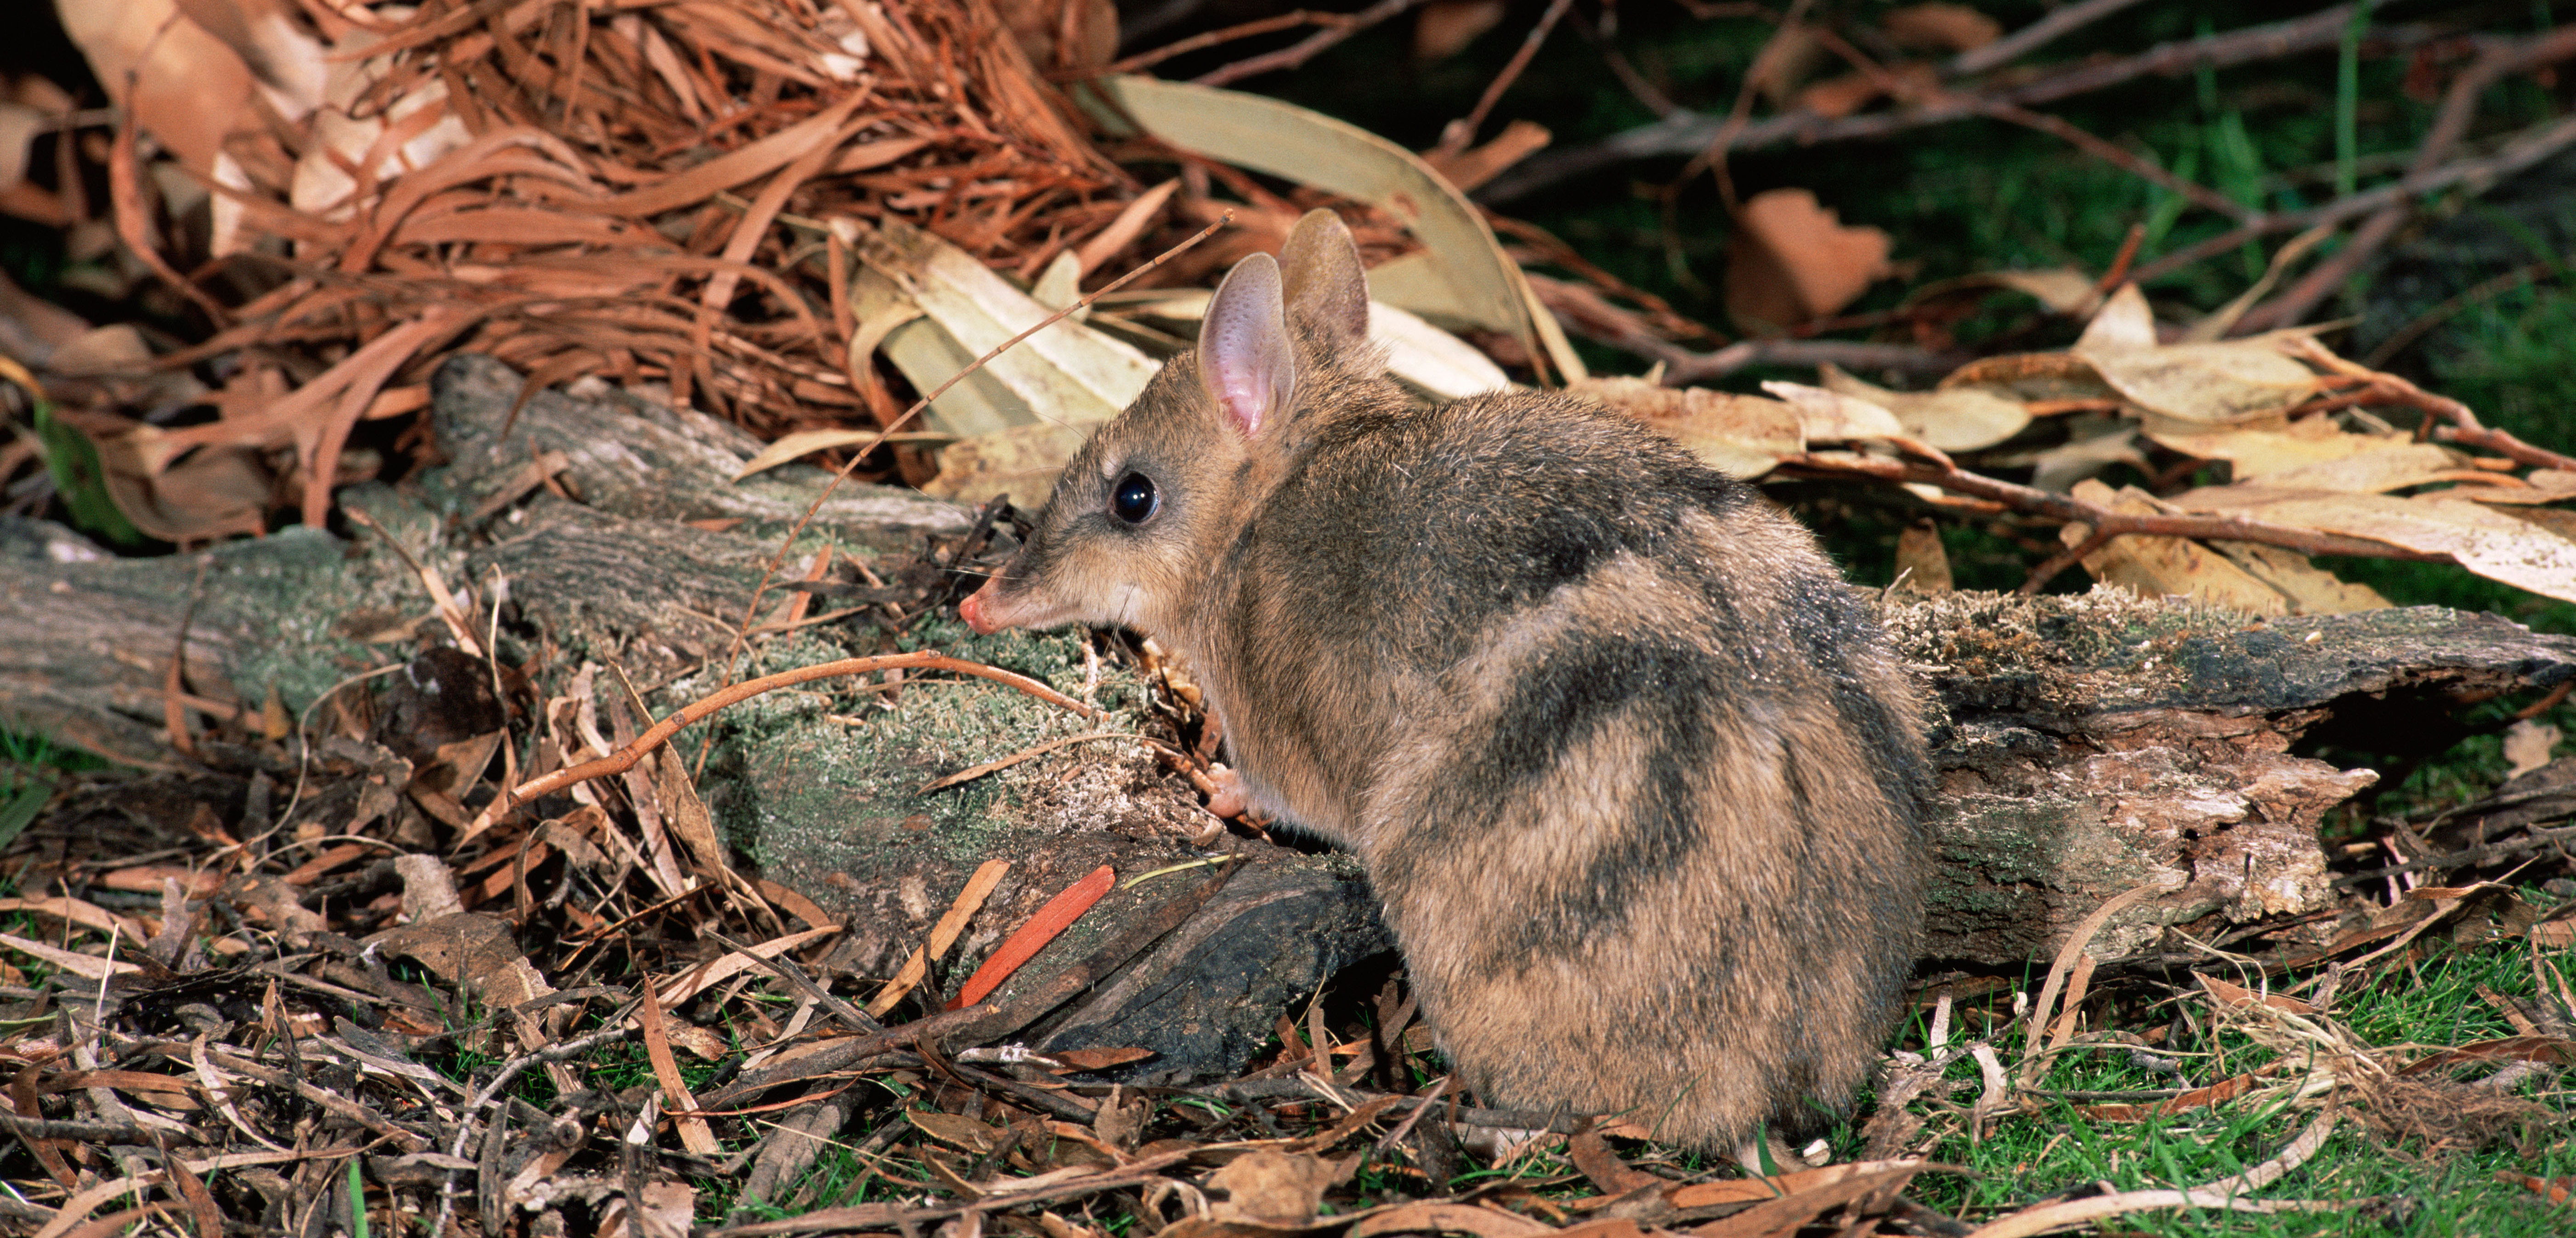 Just keep looking over your shoulder, bandicoot. Photo by Dave Watts/Alamy Stock Photo